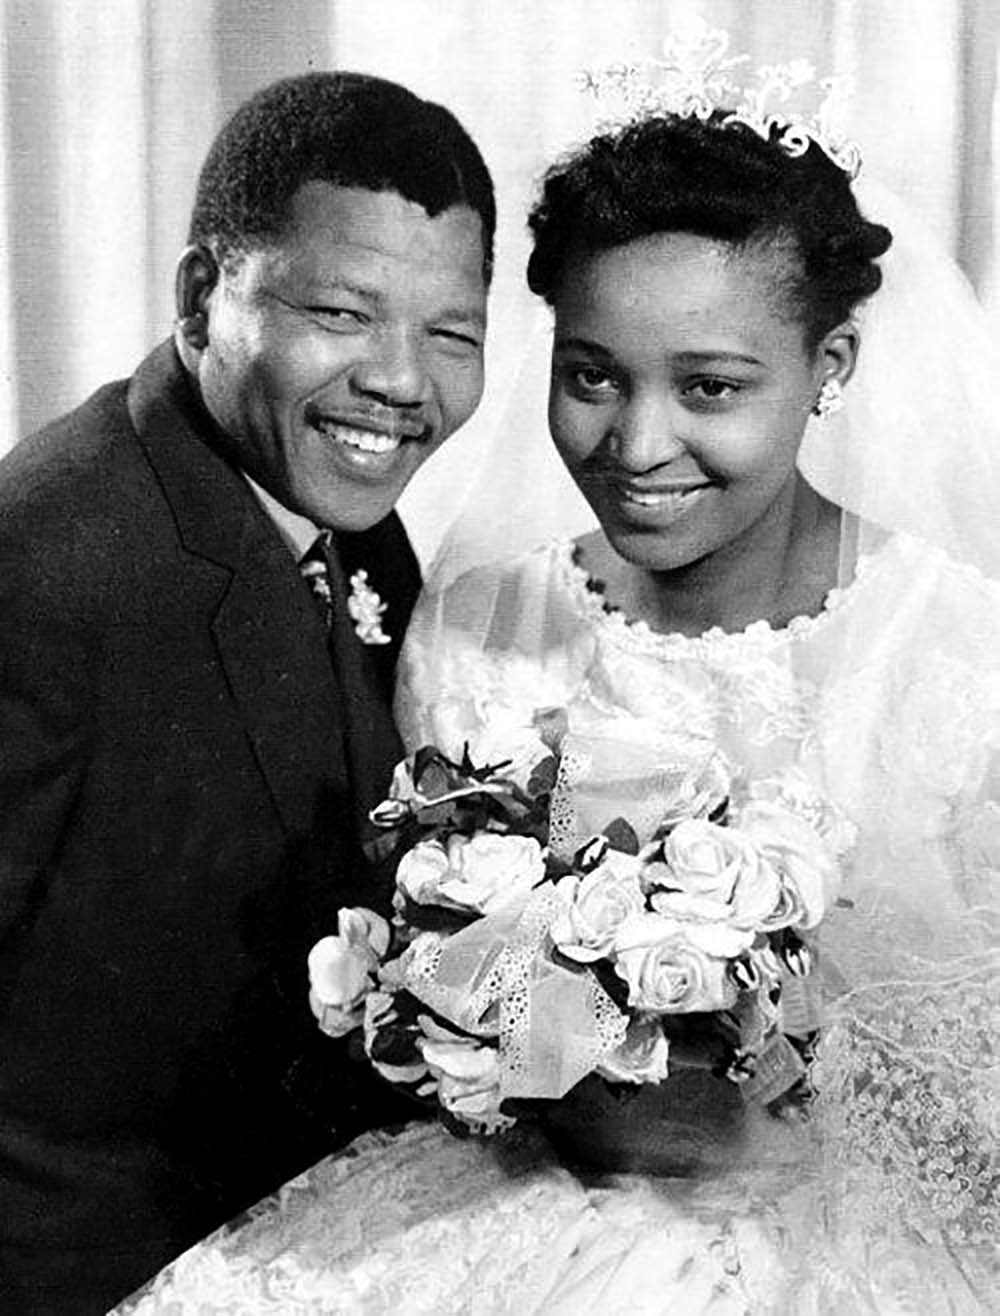 Nelson and Winnie Mandela at their wedding, June 14, 1958Public domain image